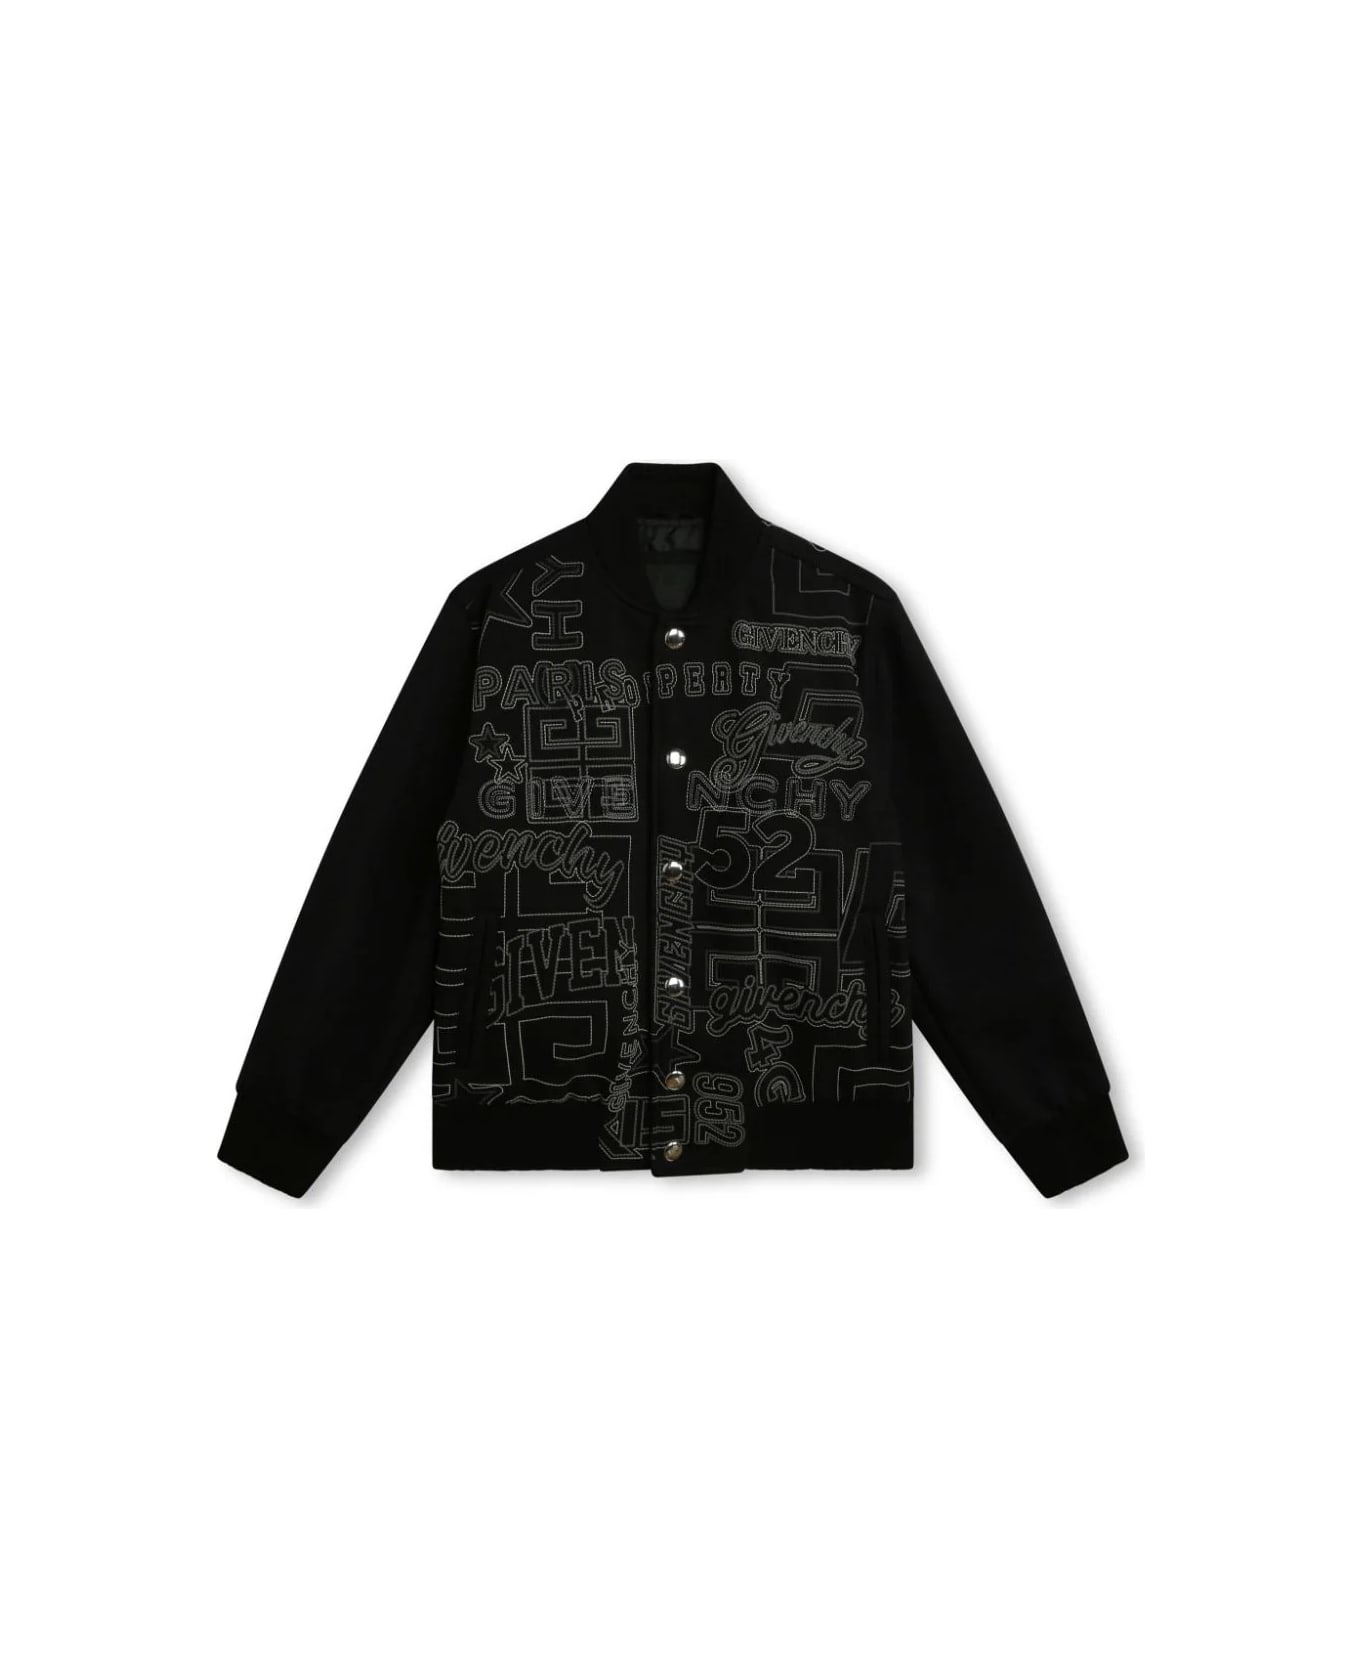 Givenchy Black Bomber Jacket With All-over Embroidery - Black コート＆ジャケット